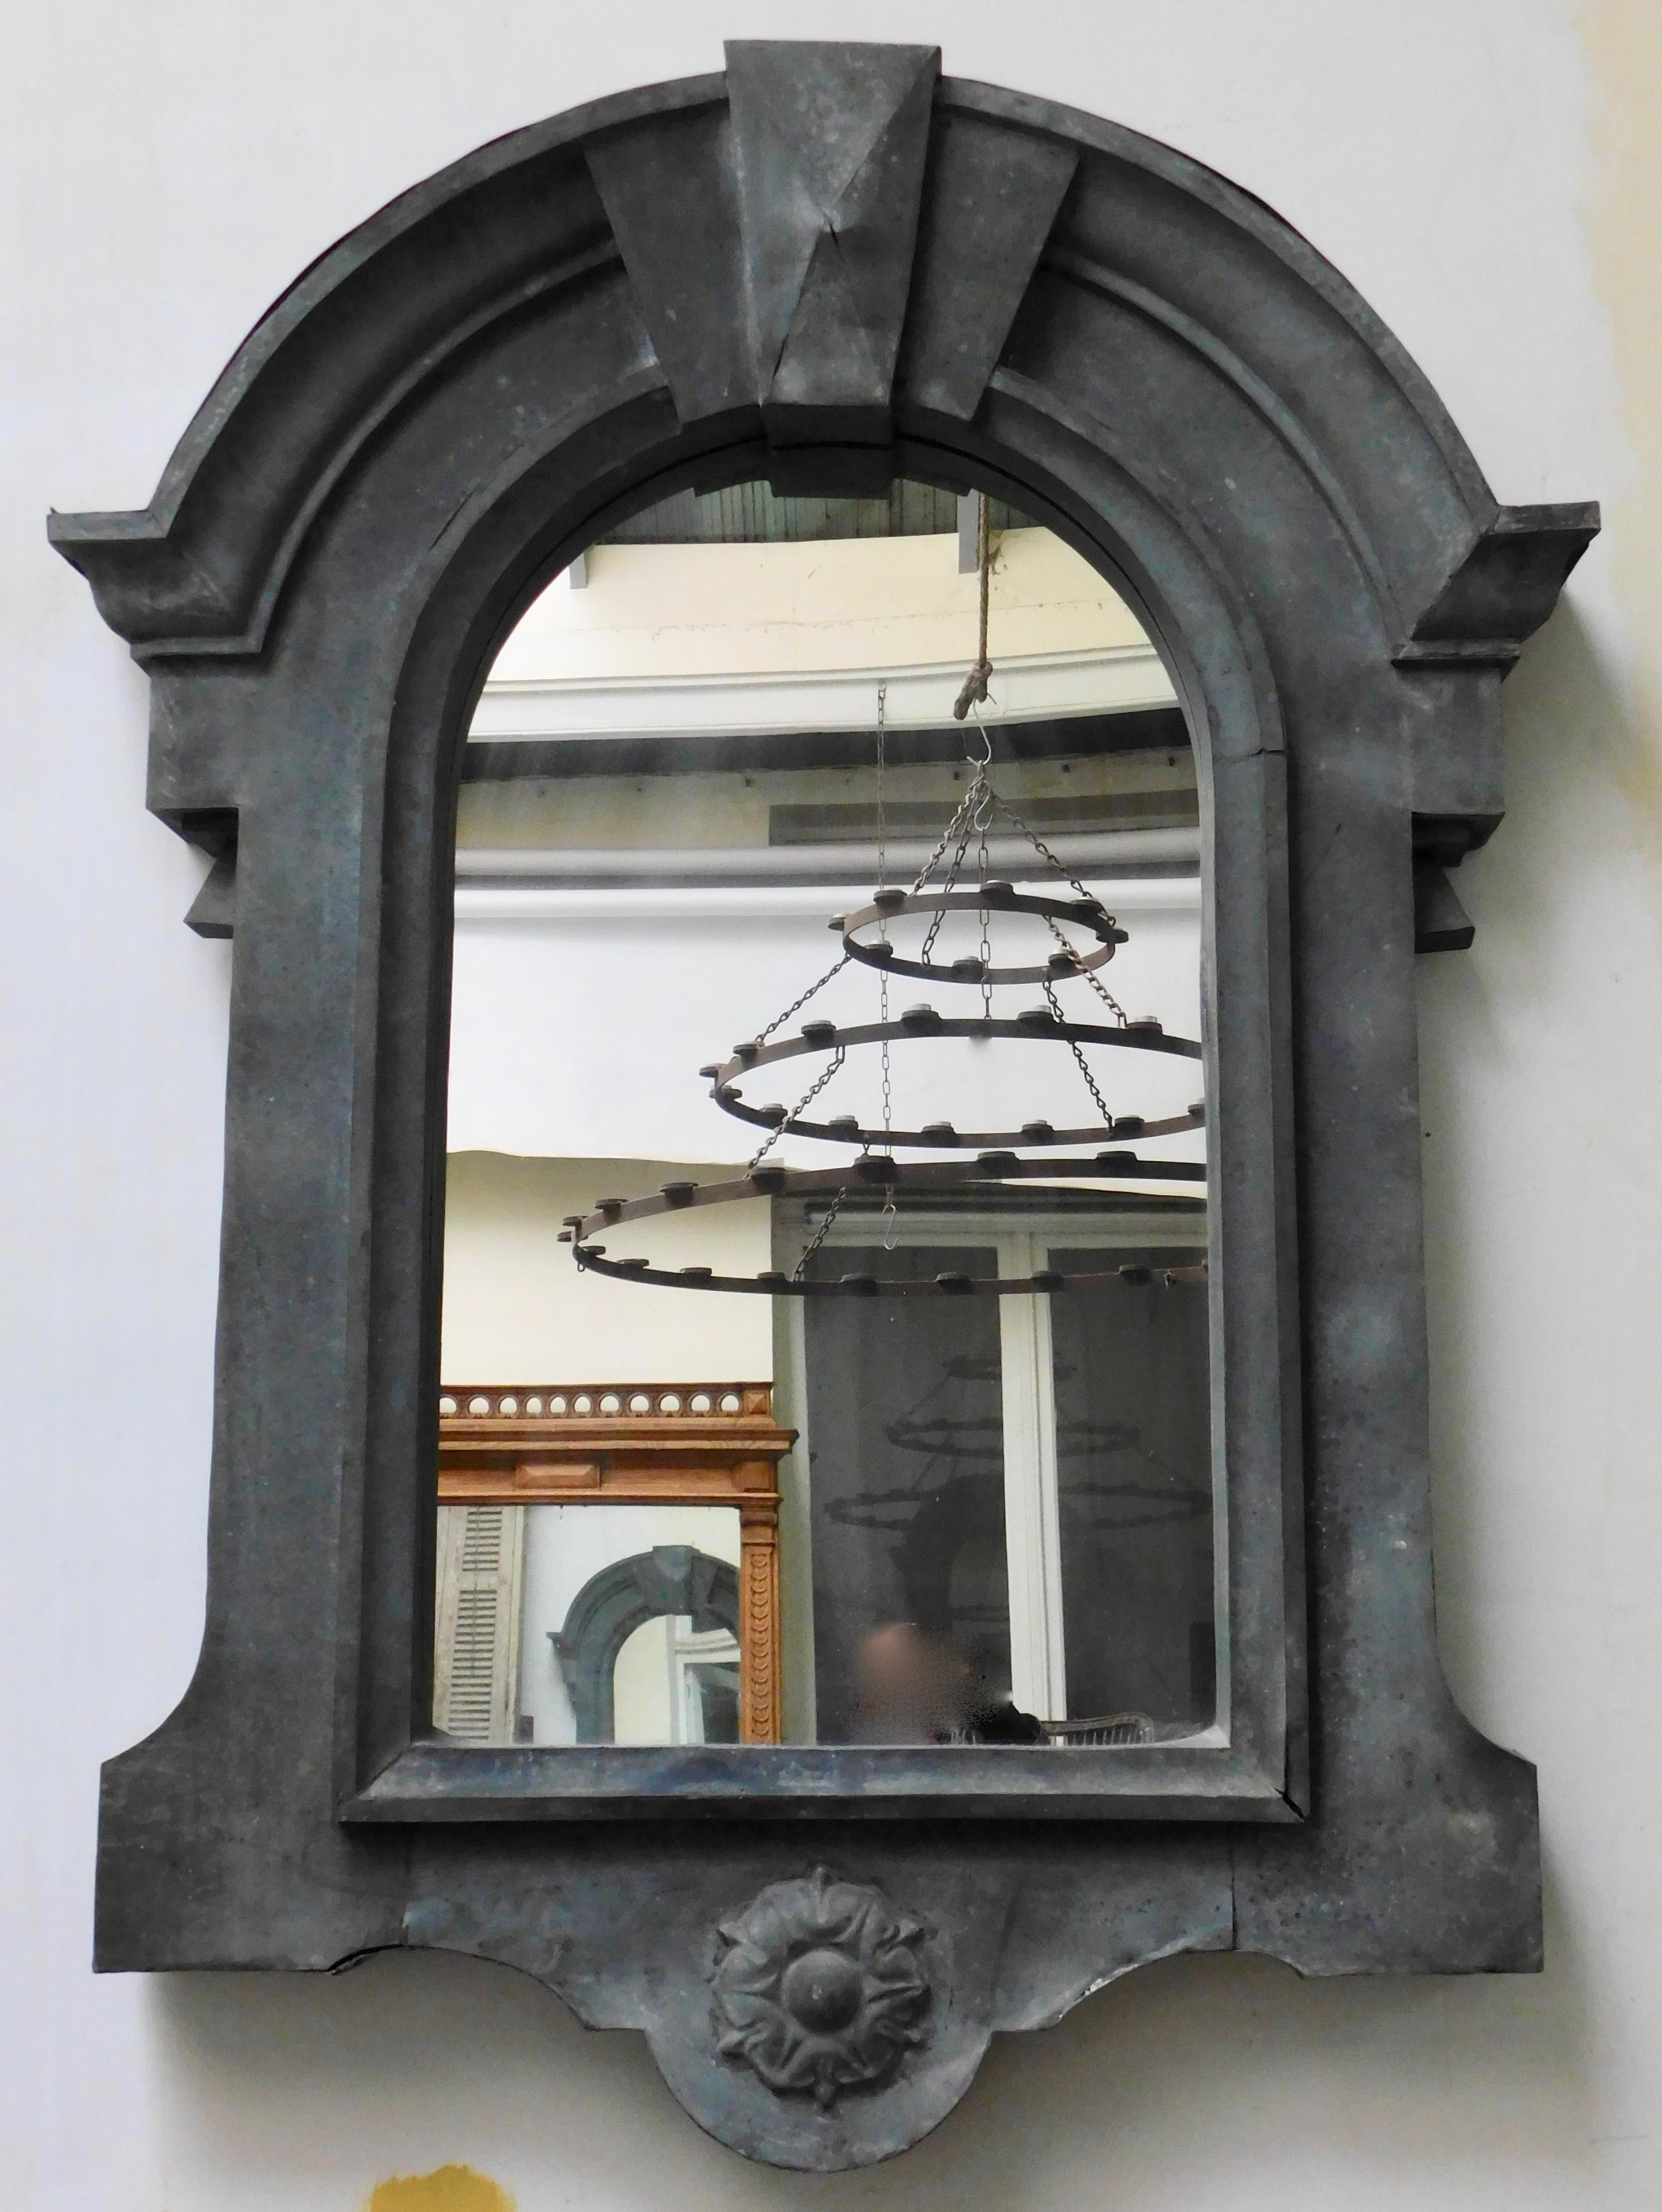 A rare and extraordinary group of three very large architectural roof dormers handmade of zinc and affixed with mirrors.
Fantastic to use outdoors on the wall of a garden or indoors on a large wall.
Originally used as roof windows 